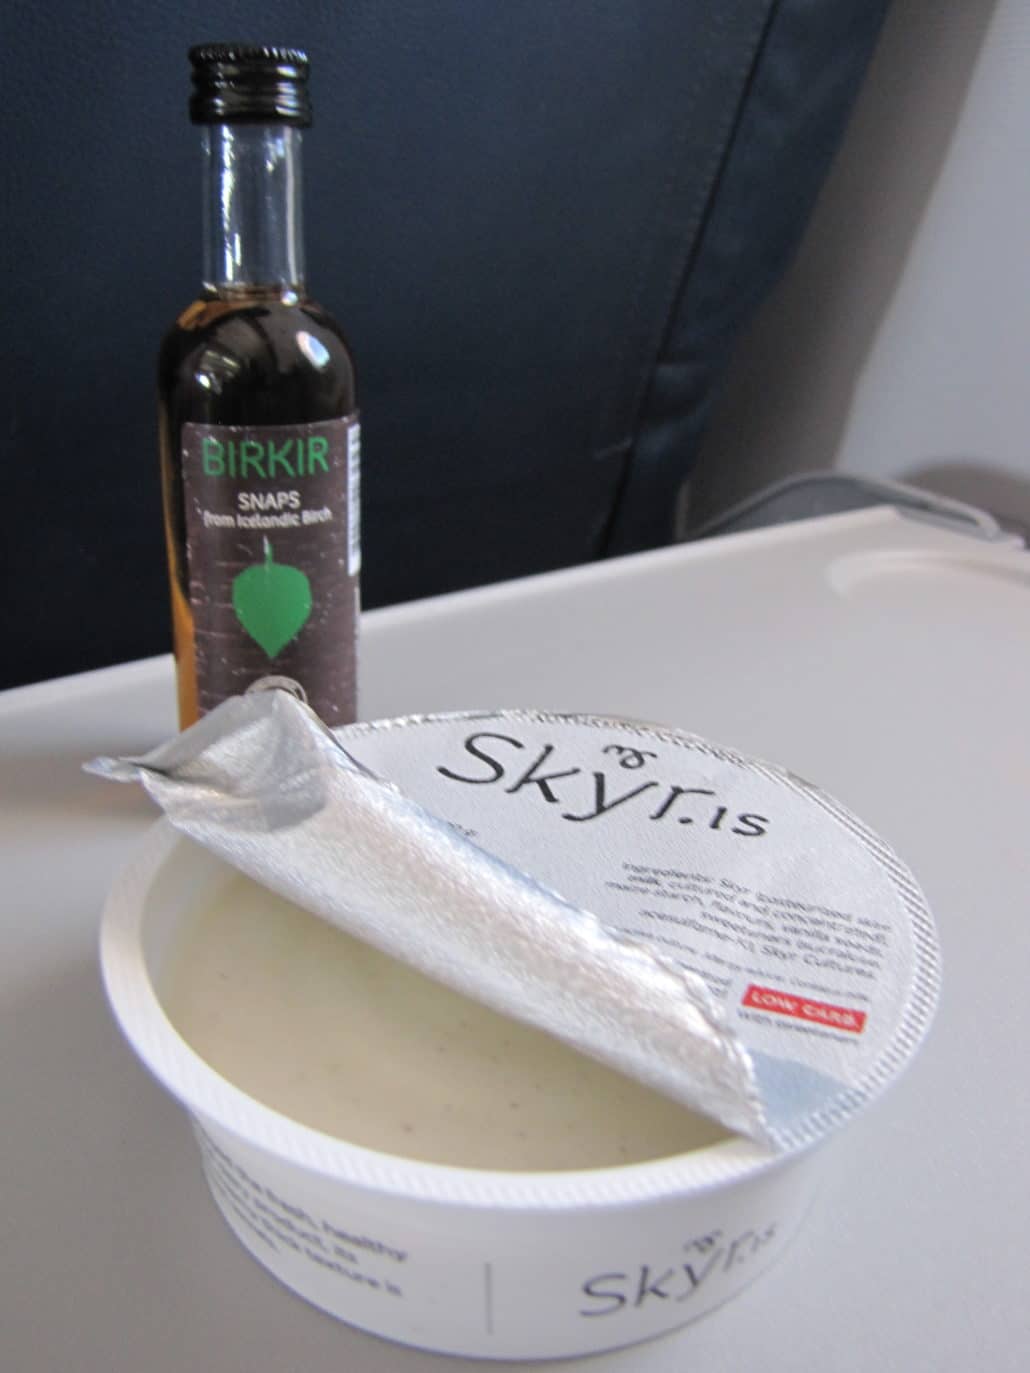 Local flavors: Food and drink for sale on board include Icelandic liquors and yogurt